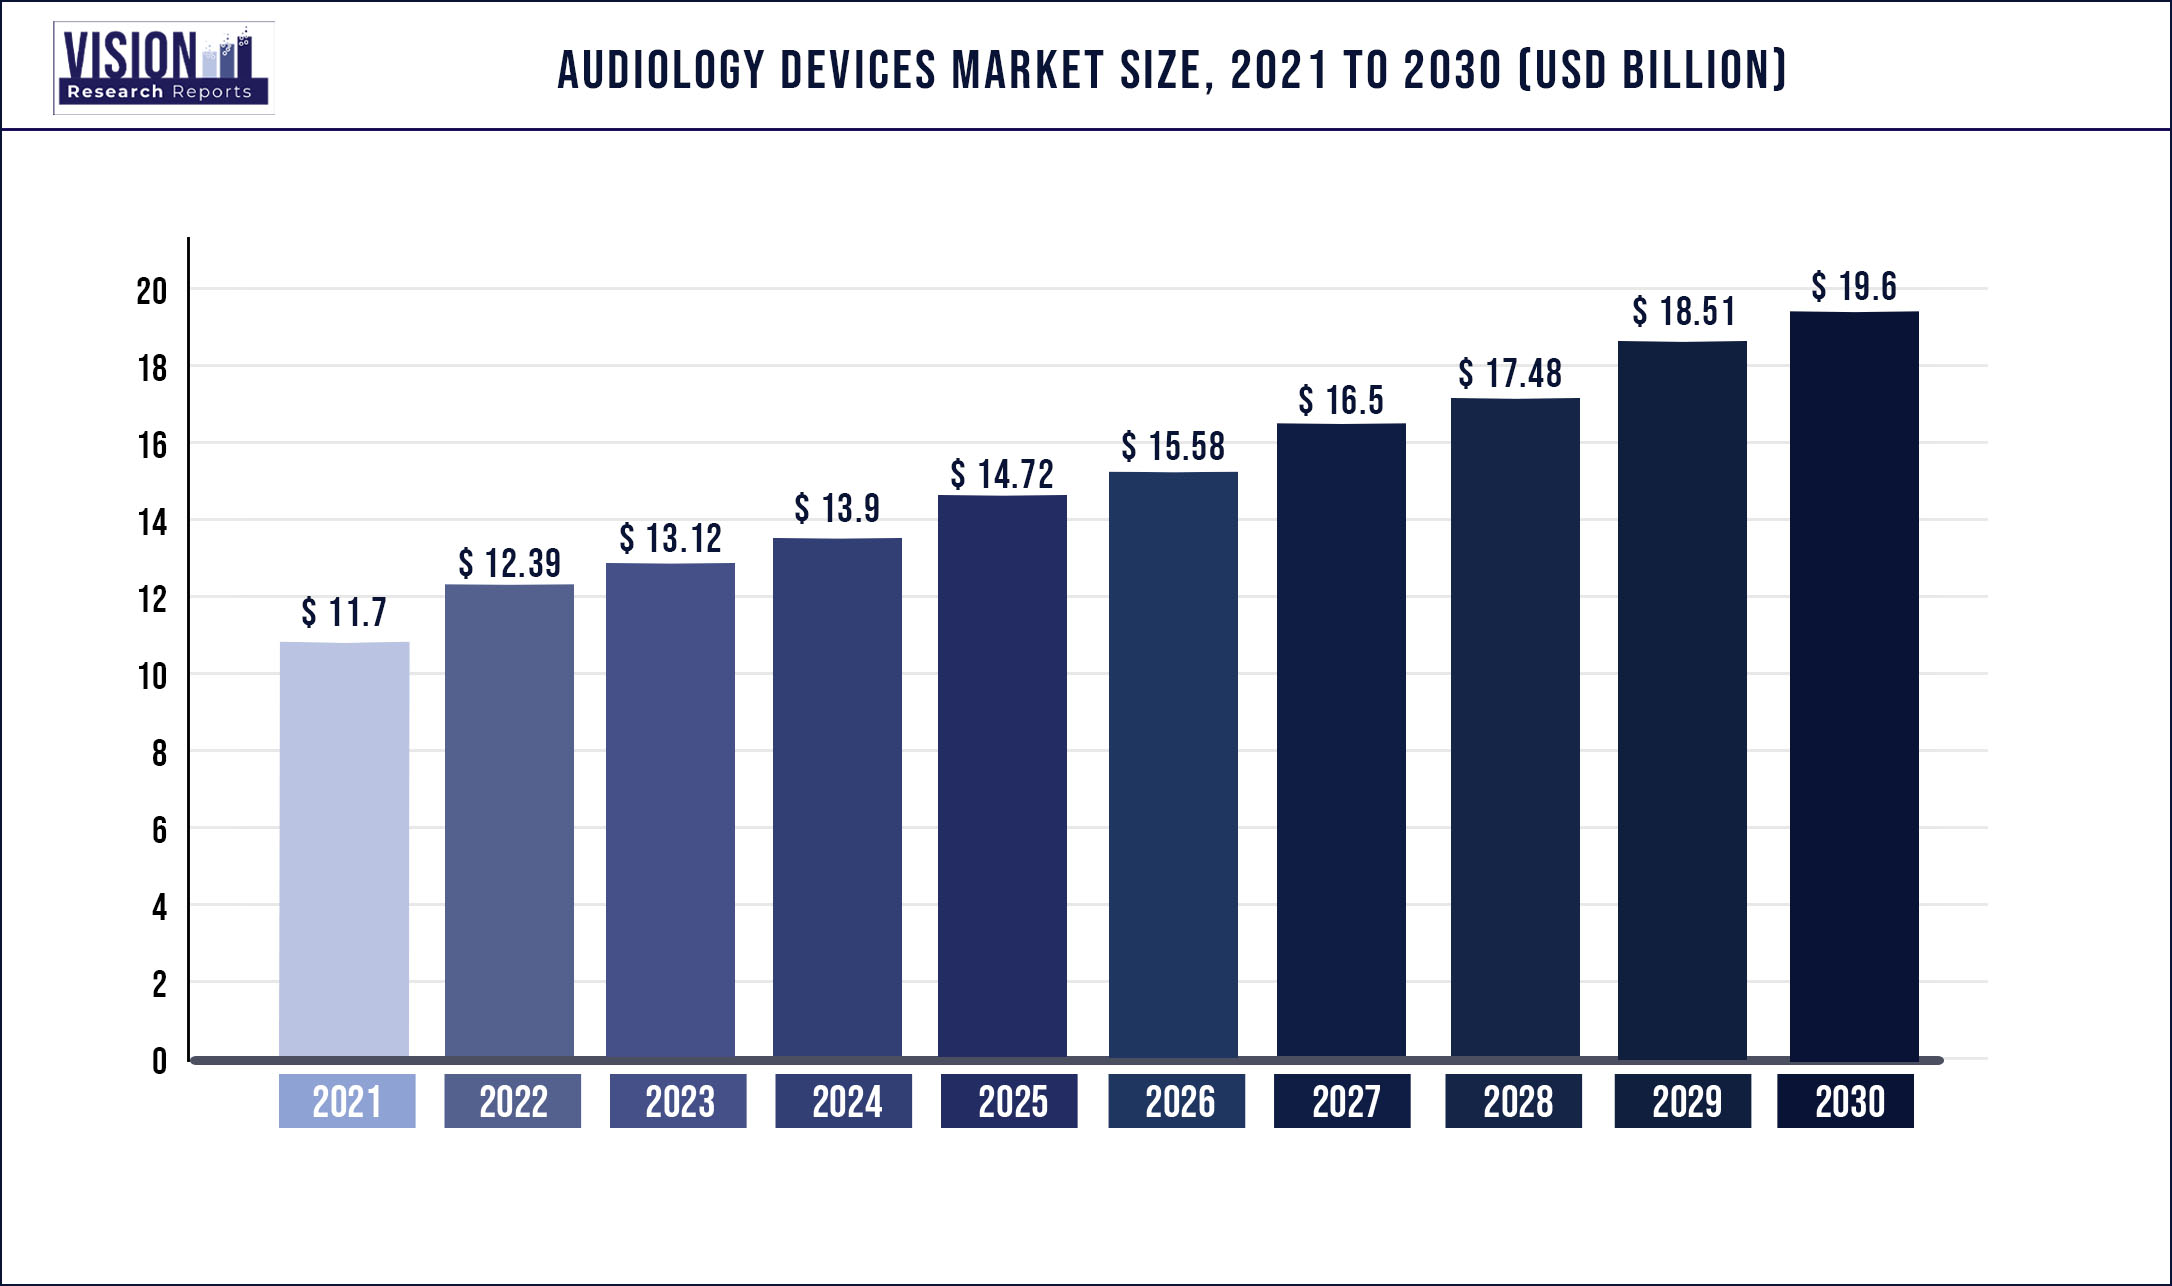 Audiology Devices Market Size 2021 to 2030